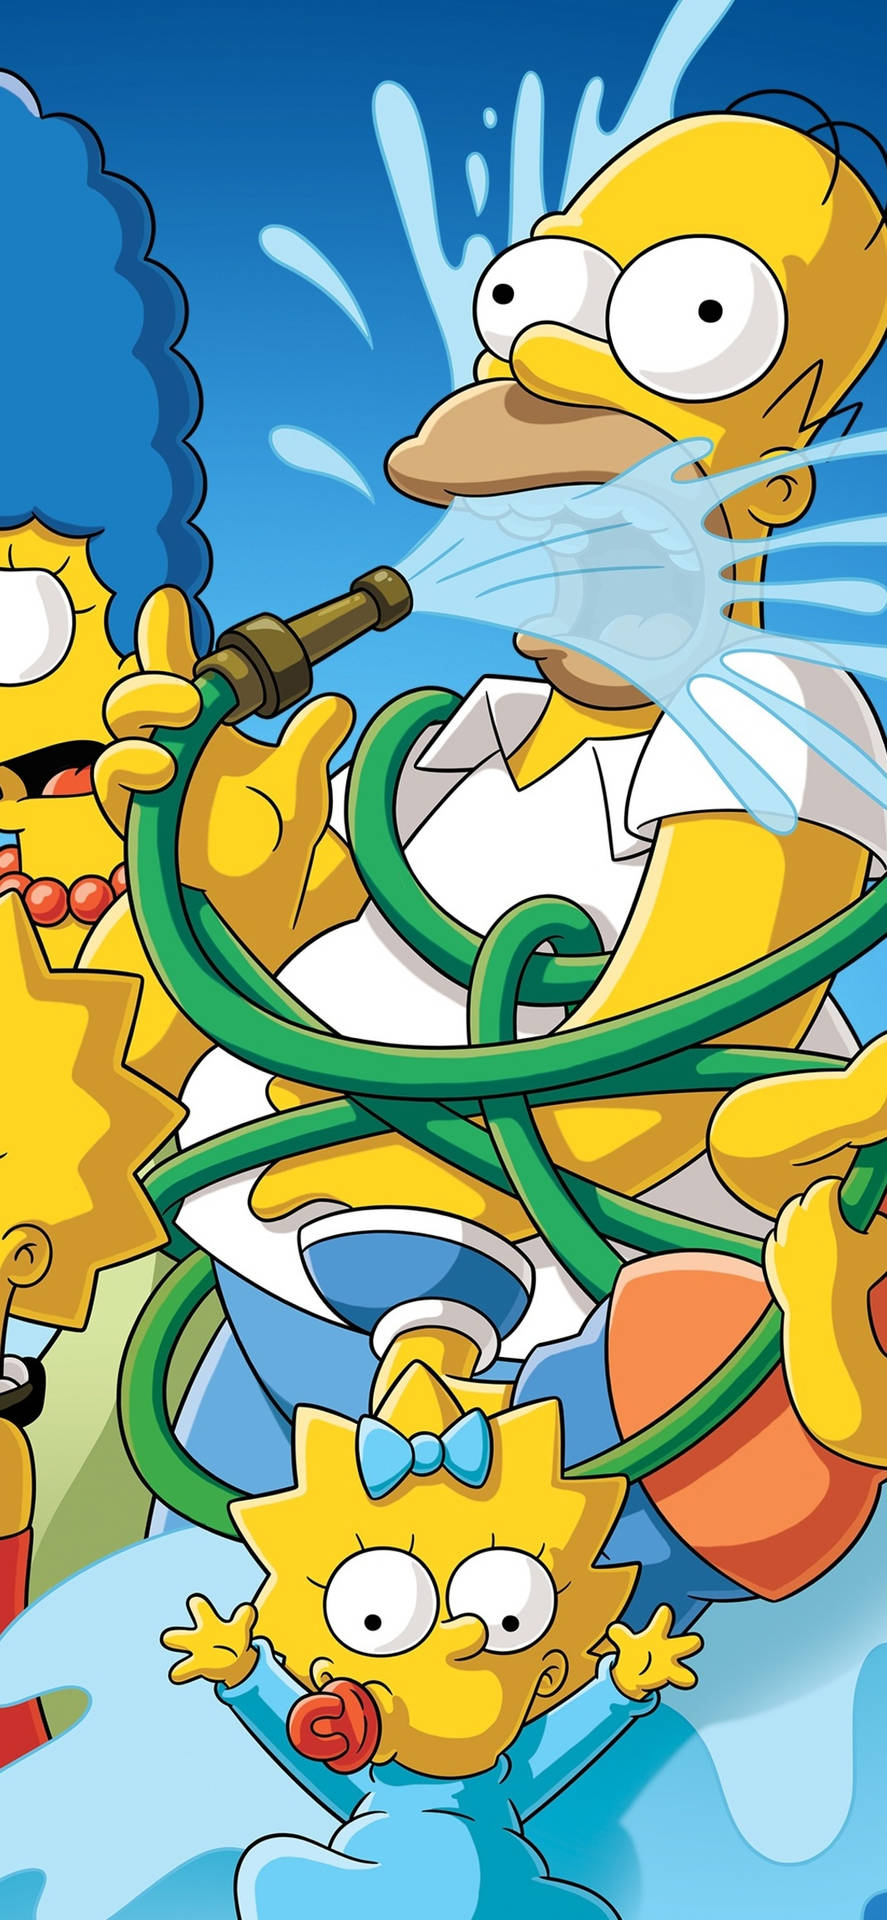 Chaotic Simpsons Family iPhone X Cartoon Wallpaper